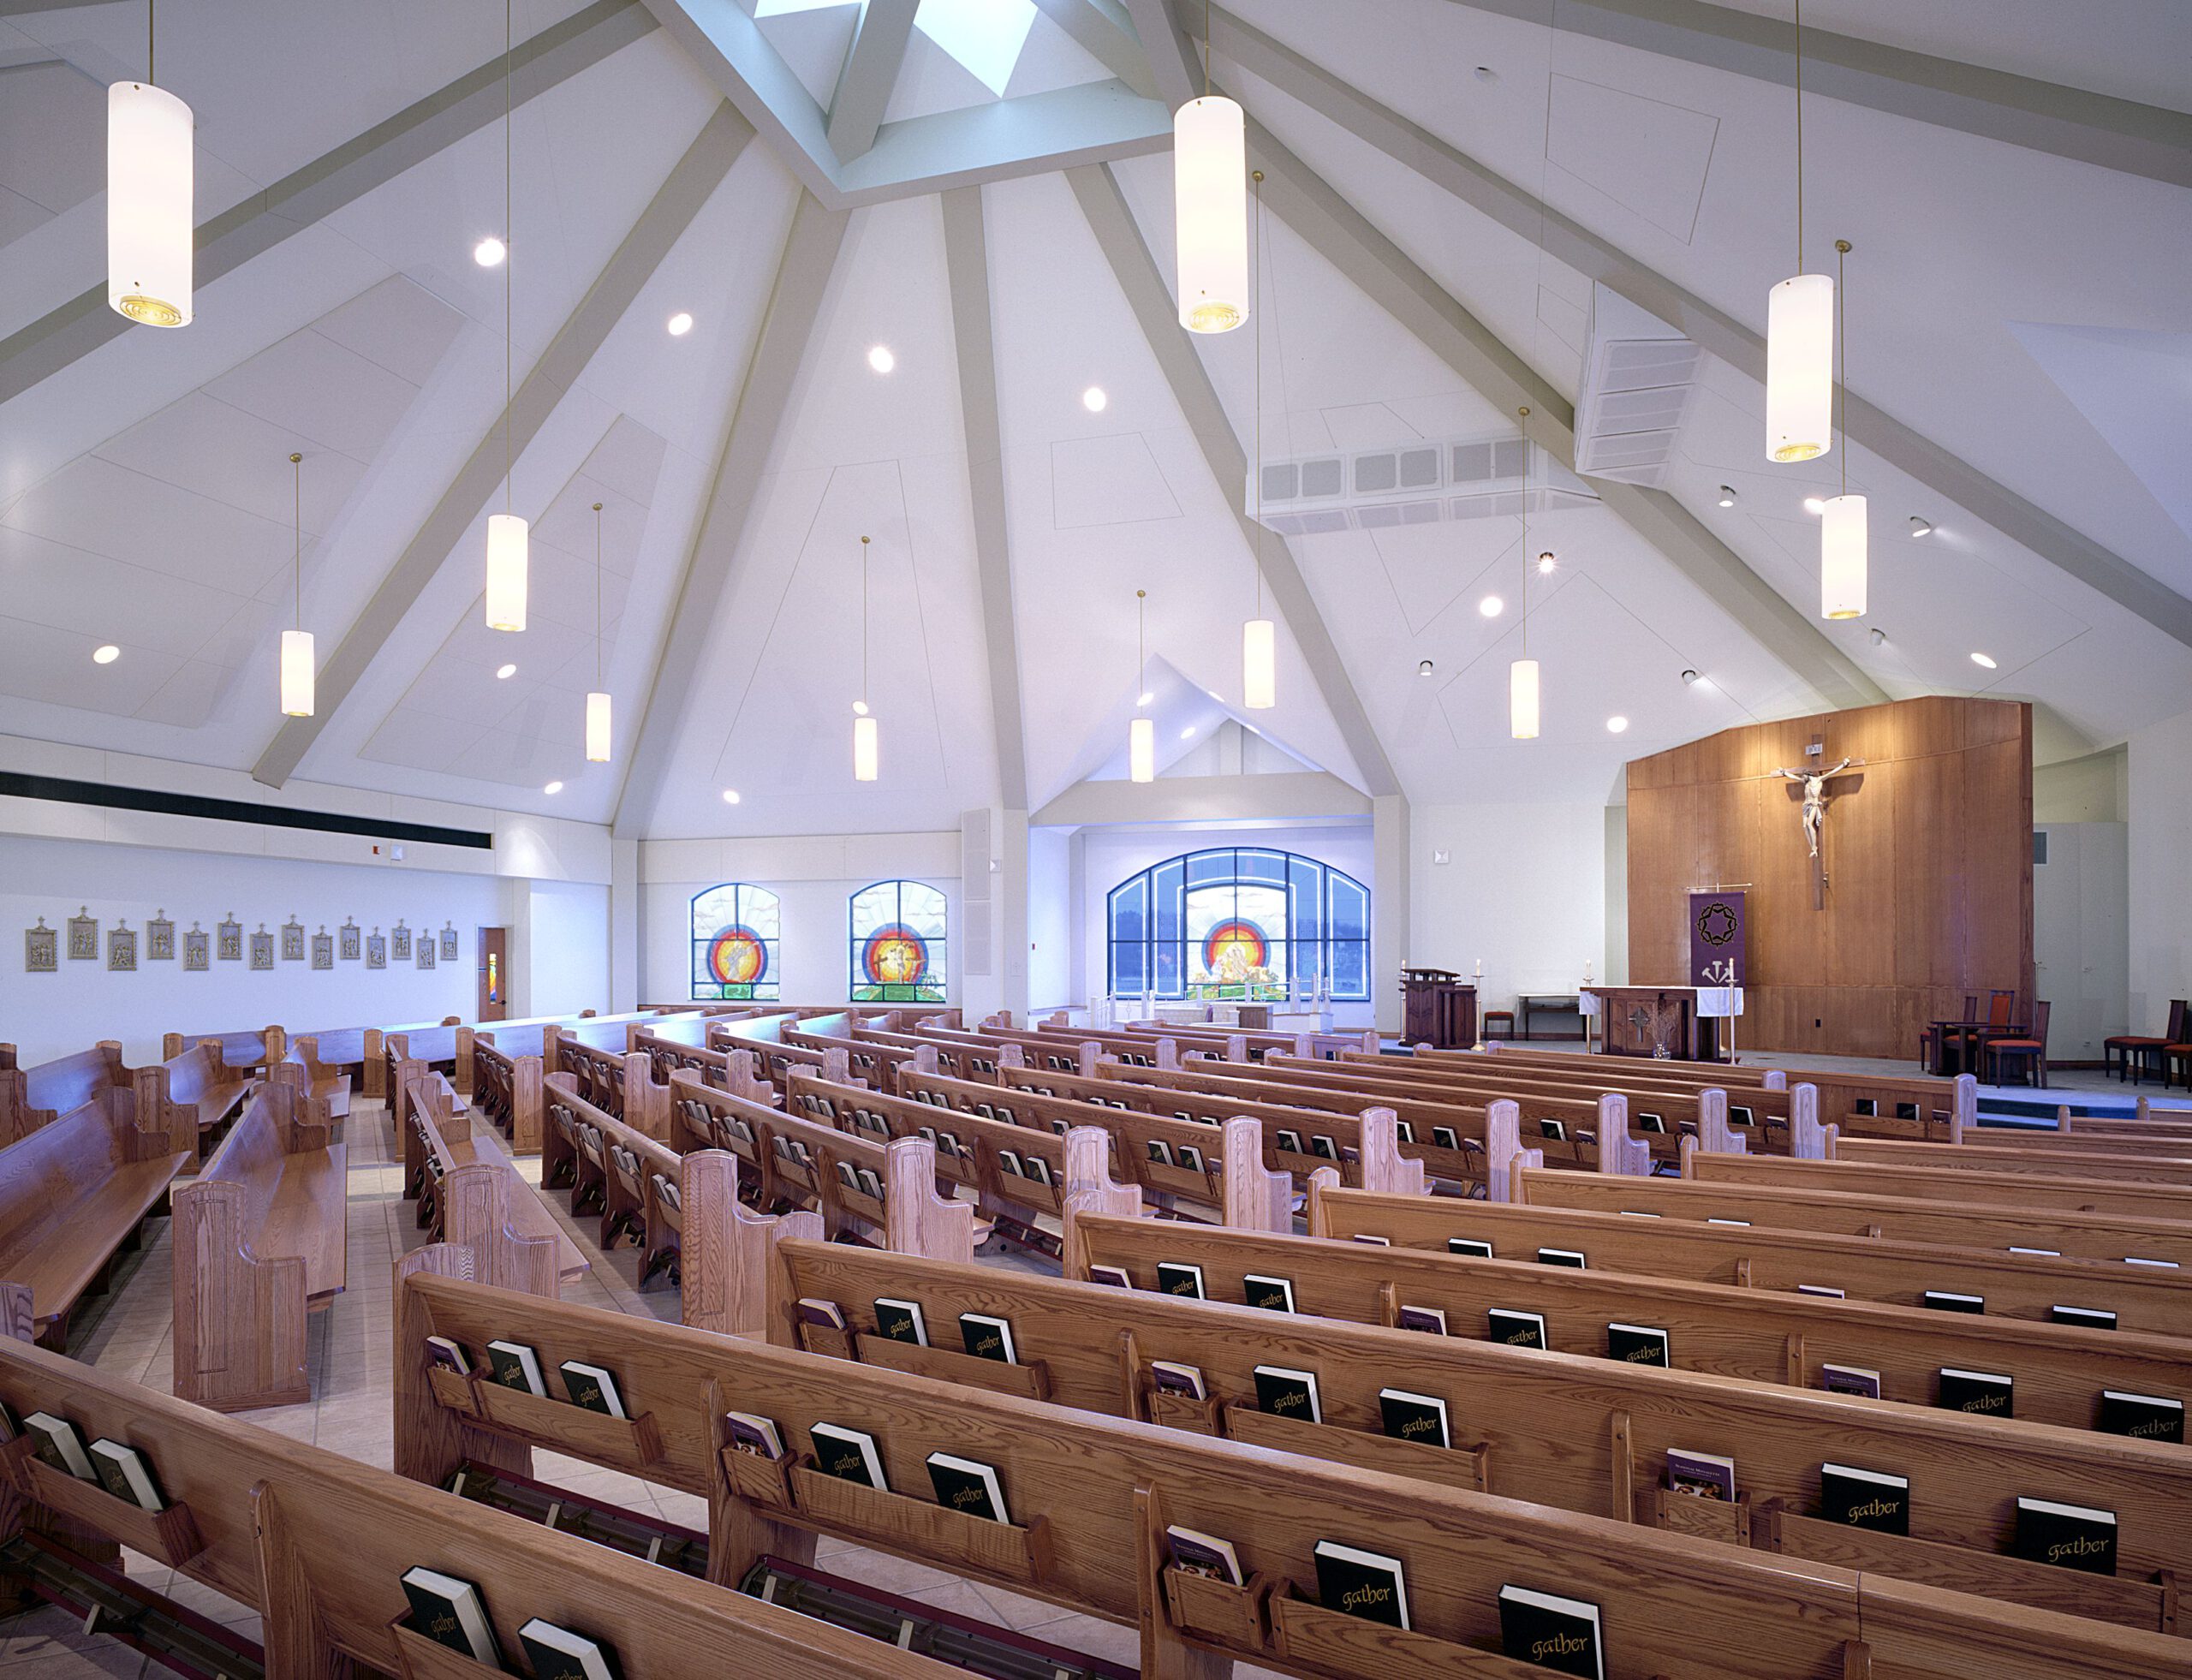 Featured image for “St. Patrick Catholic Church”